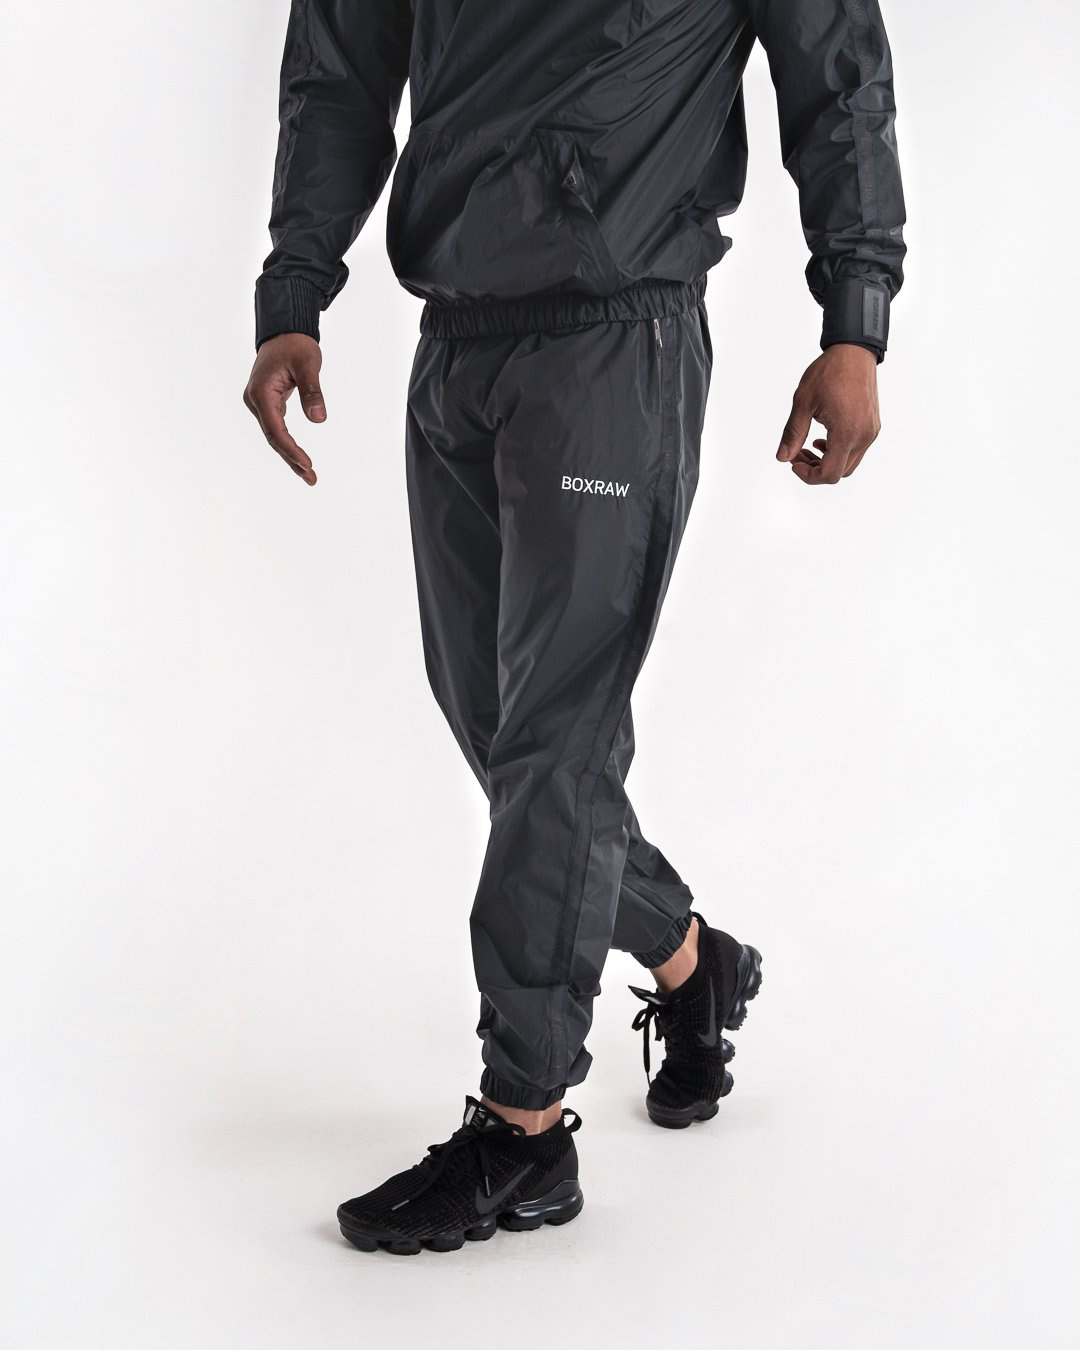 BOXRAW Hagler Boxing Sauna Suit Available in Charcoal and Other Colors